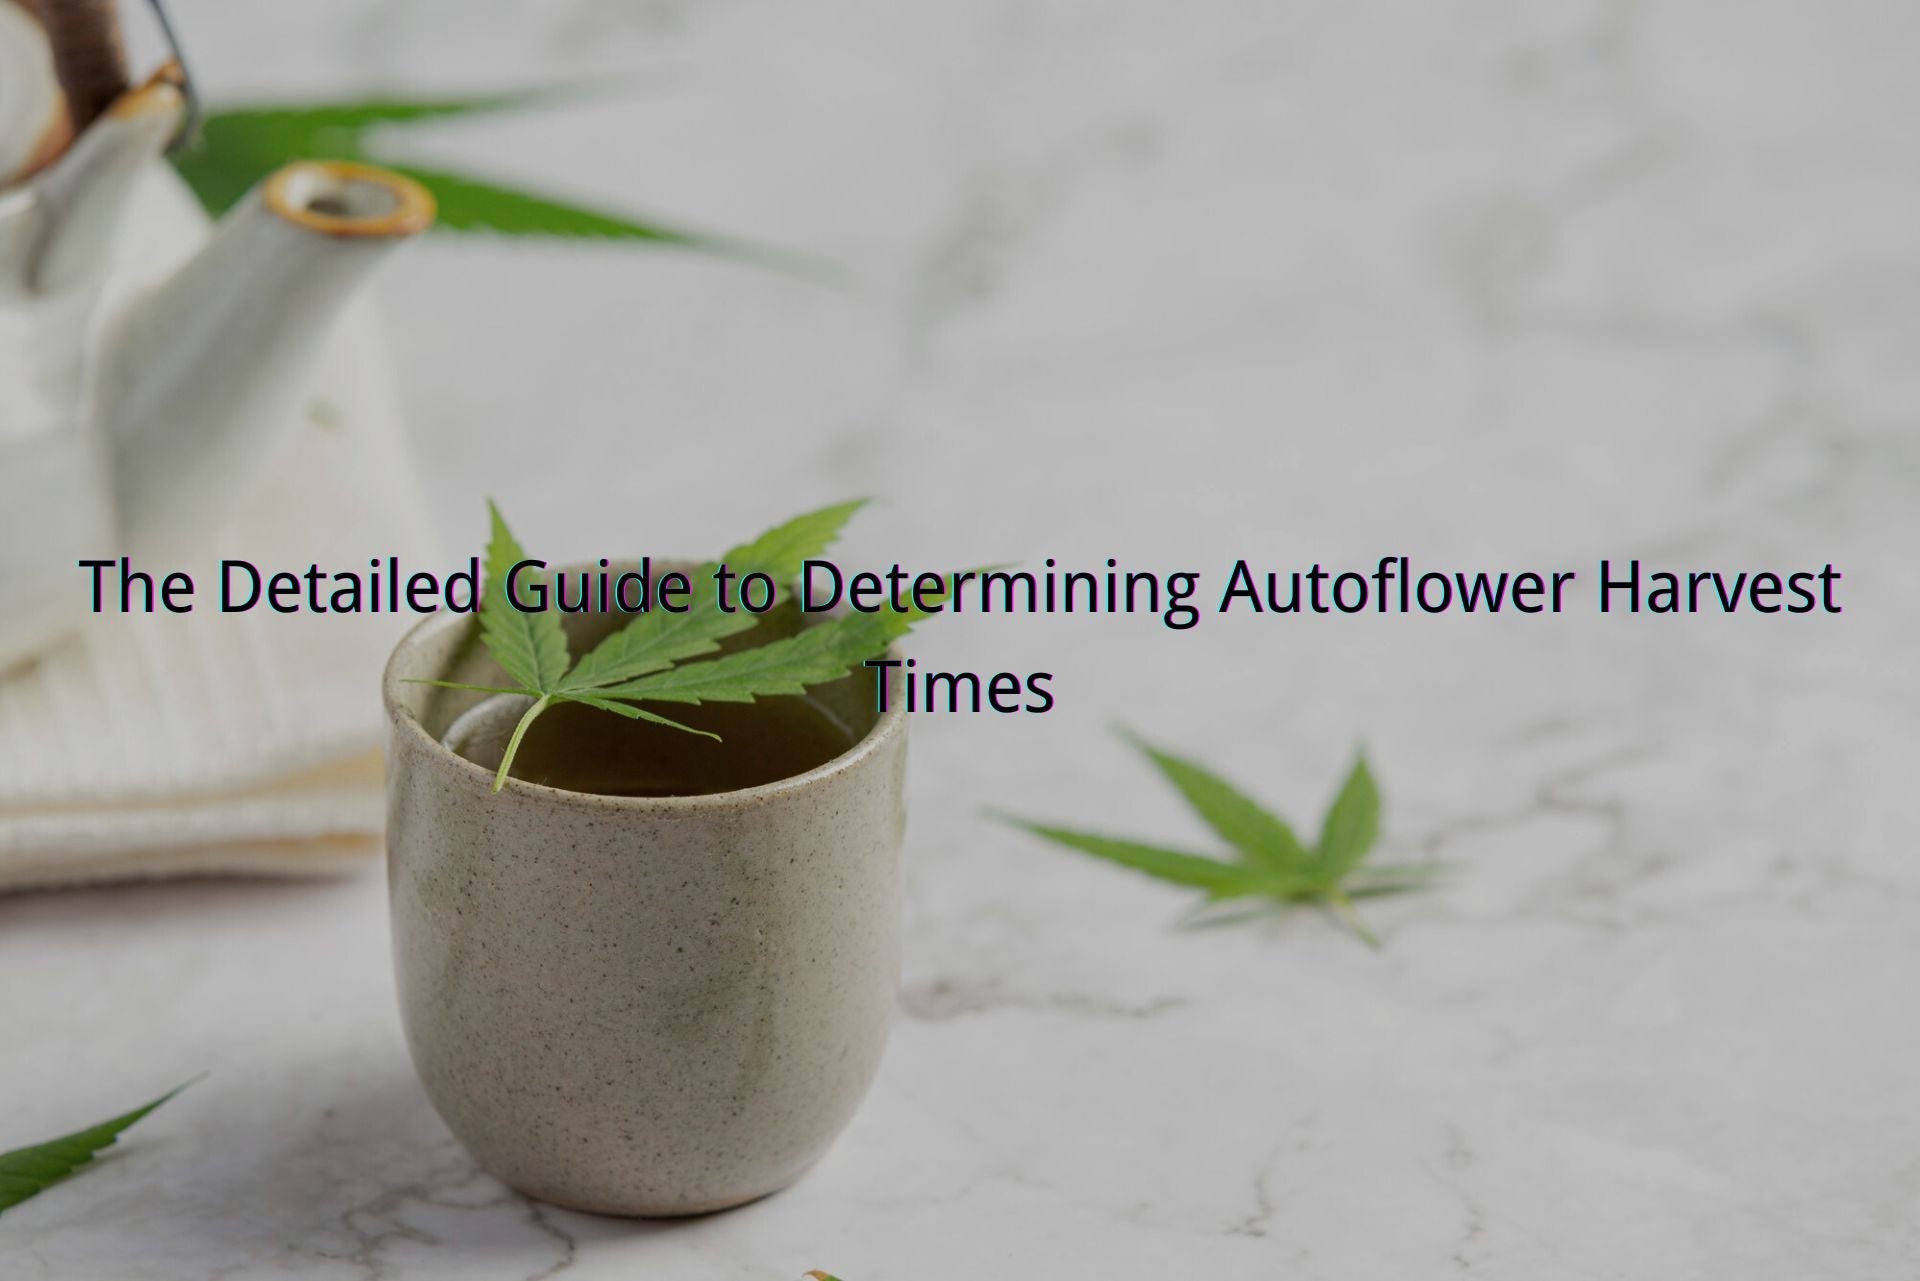 The Detailed Guide to Determining Autoflower Harvest Times